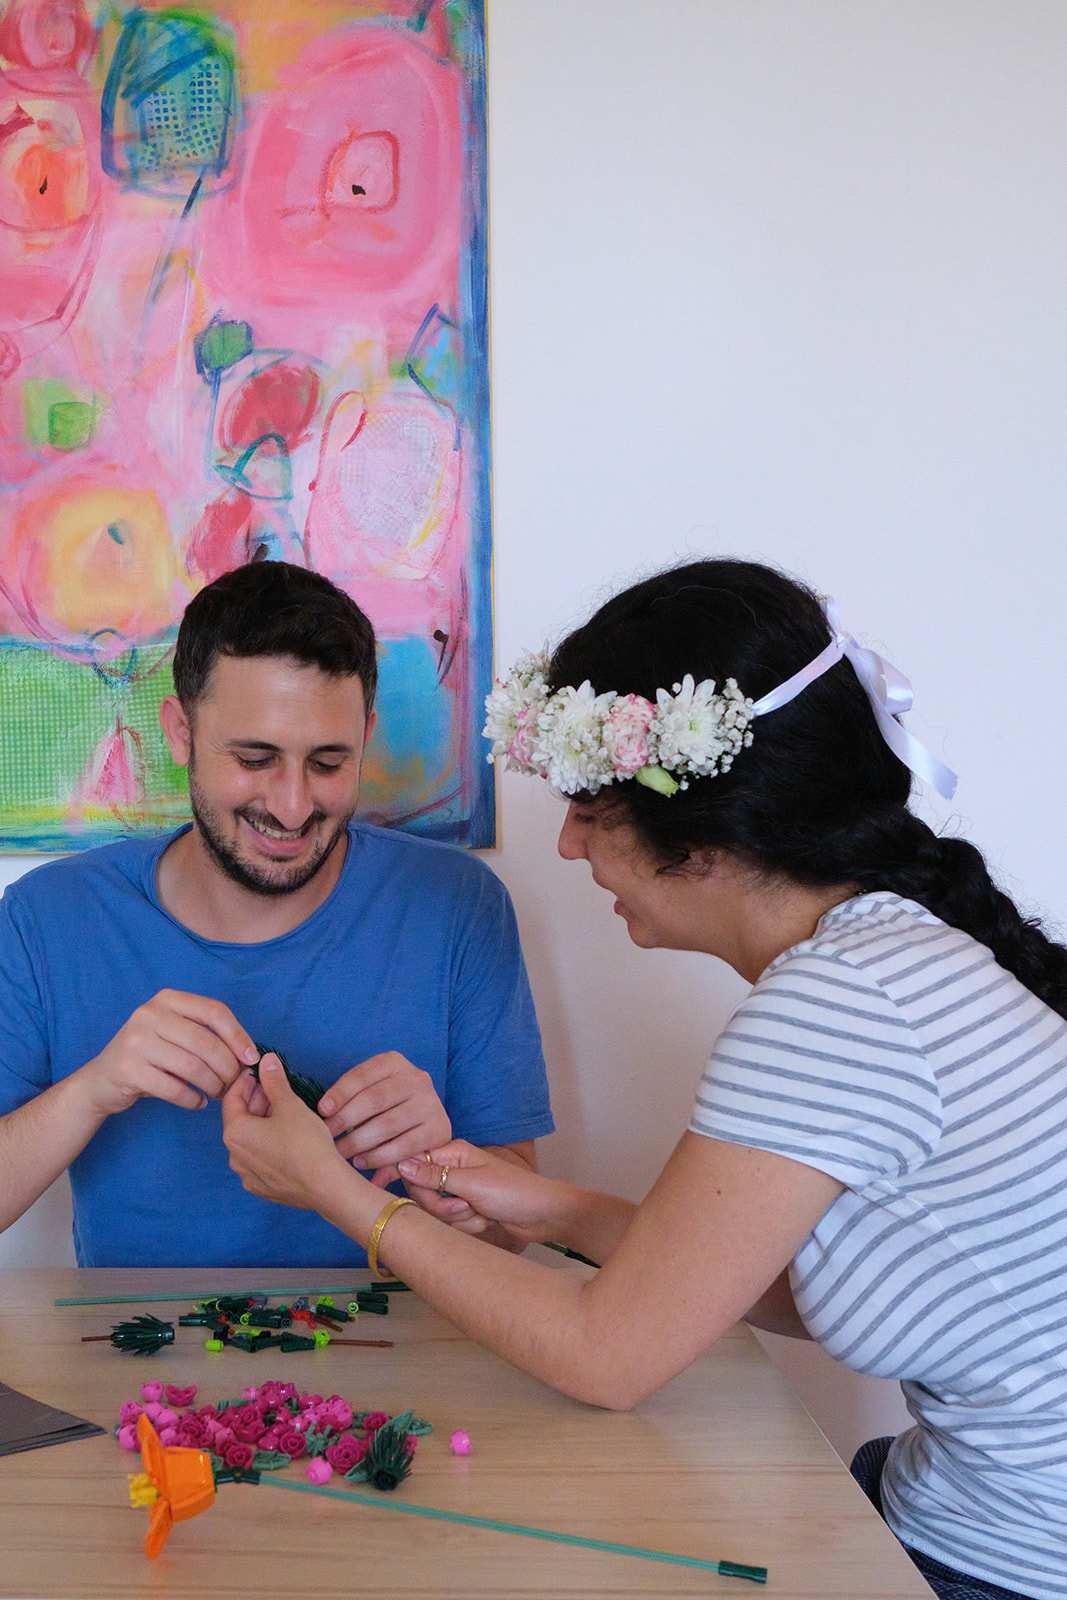 engaged couple building lego flowers together with flowers in her hair